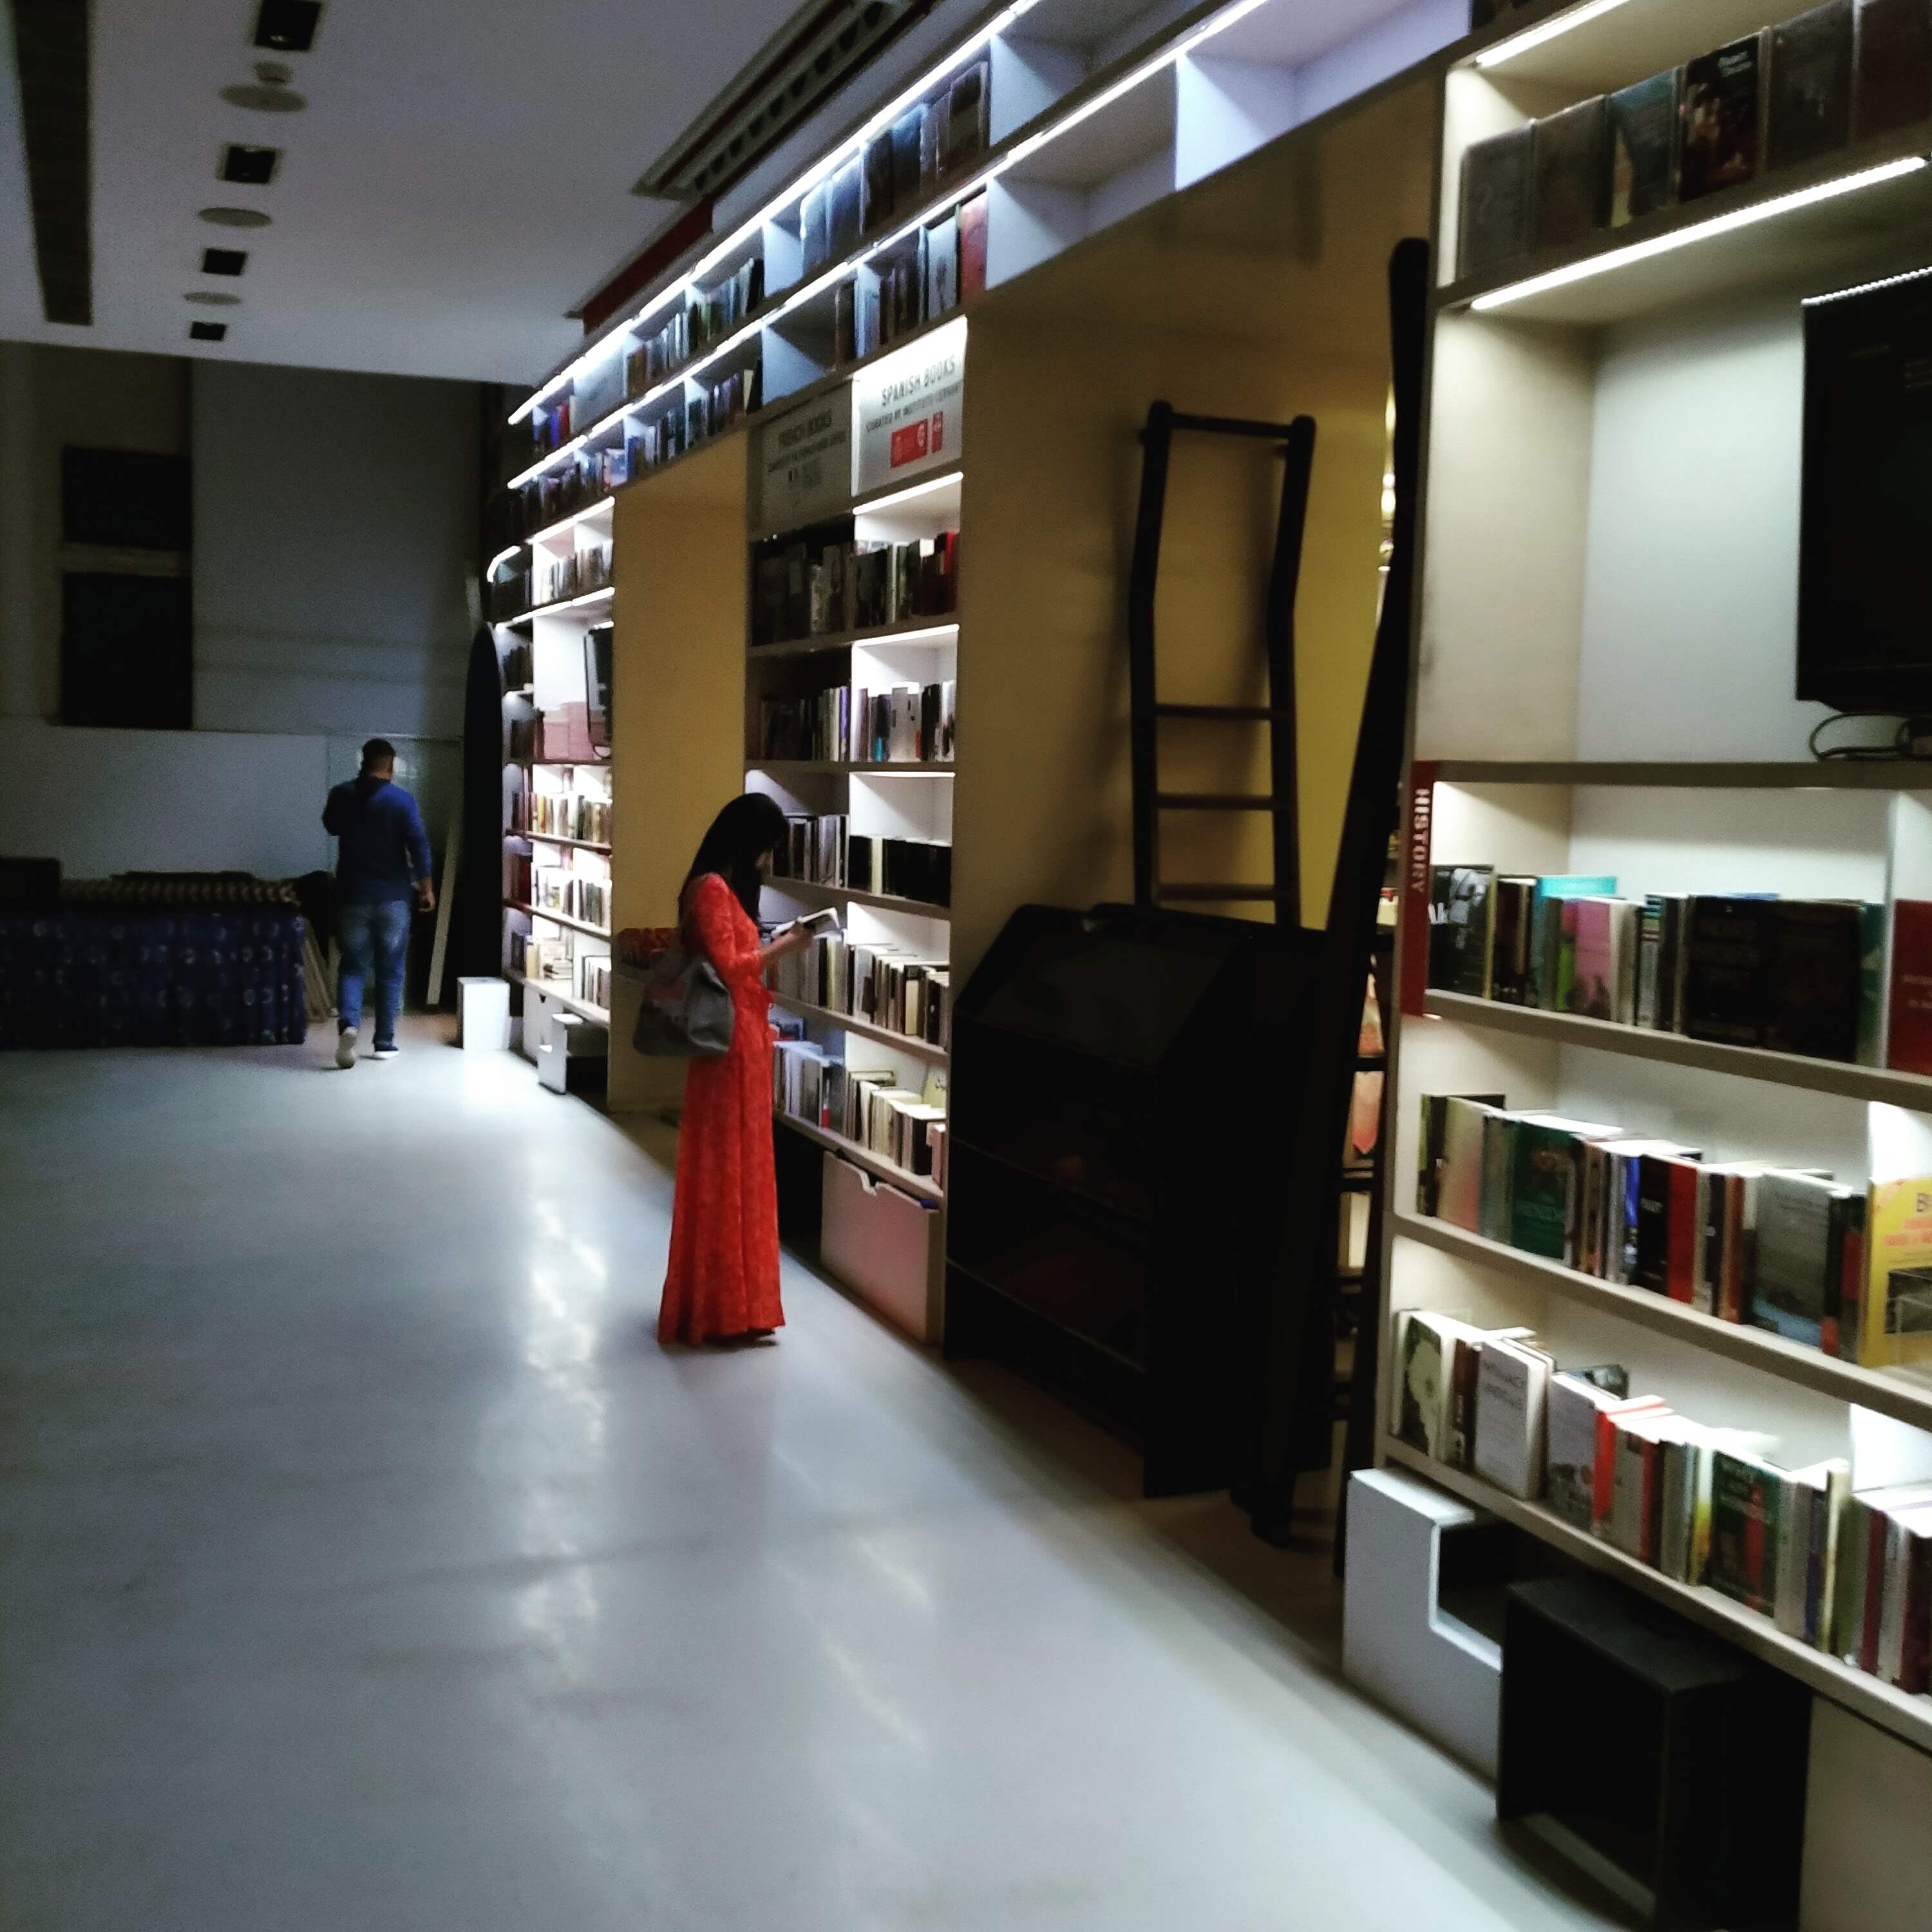 Shelf,Shelving,Bookcase,Library,Building,Public library,Bookselling,Floor,Interior design,Architecture